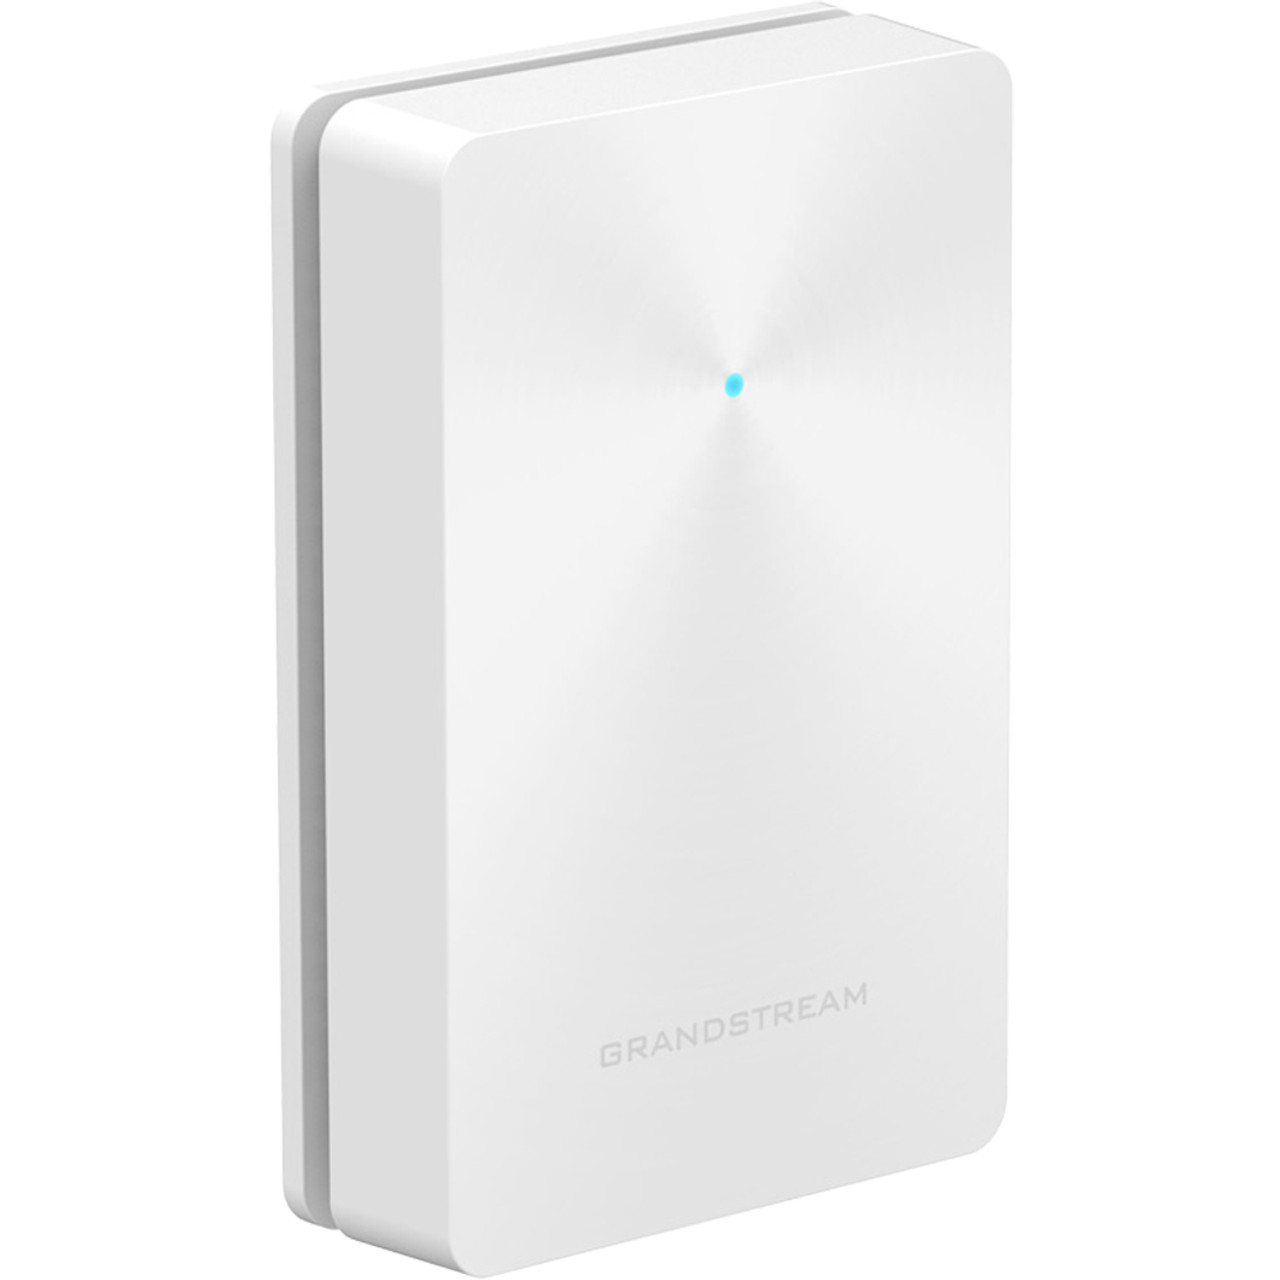 Grandstream-GWN7624-In-Wall-Wi-Fi-Access-Point view a